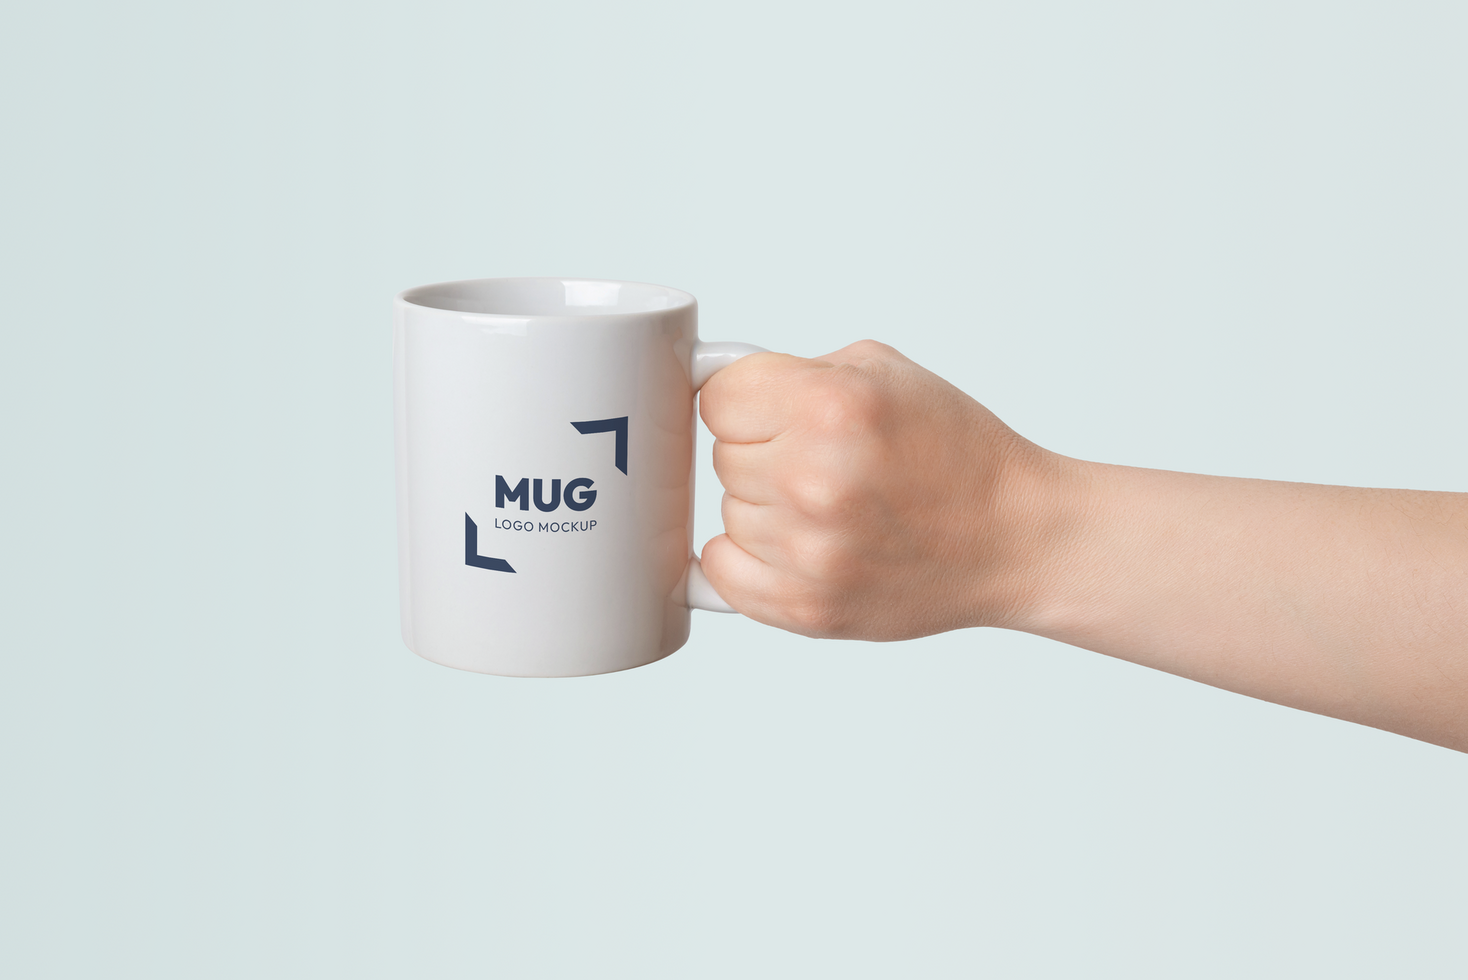 White mug held in hand with logo branding mockup and interchangeable background psd